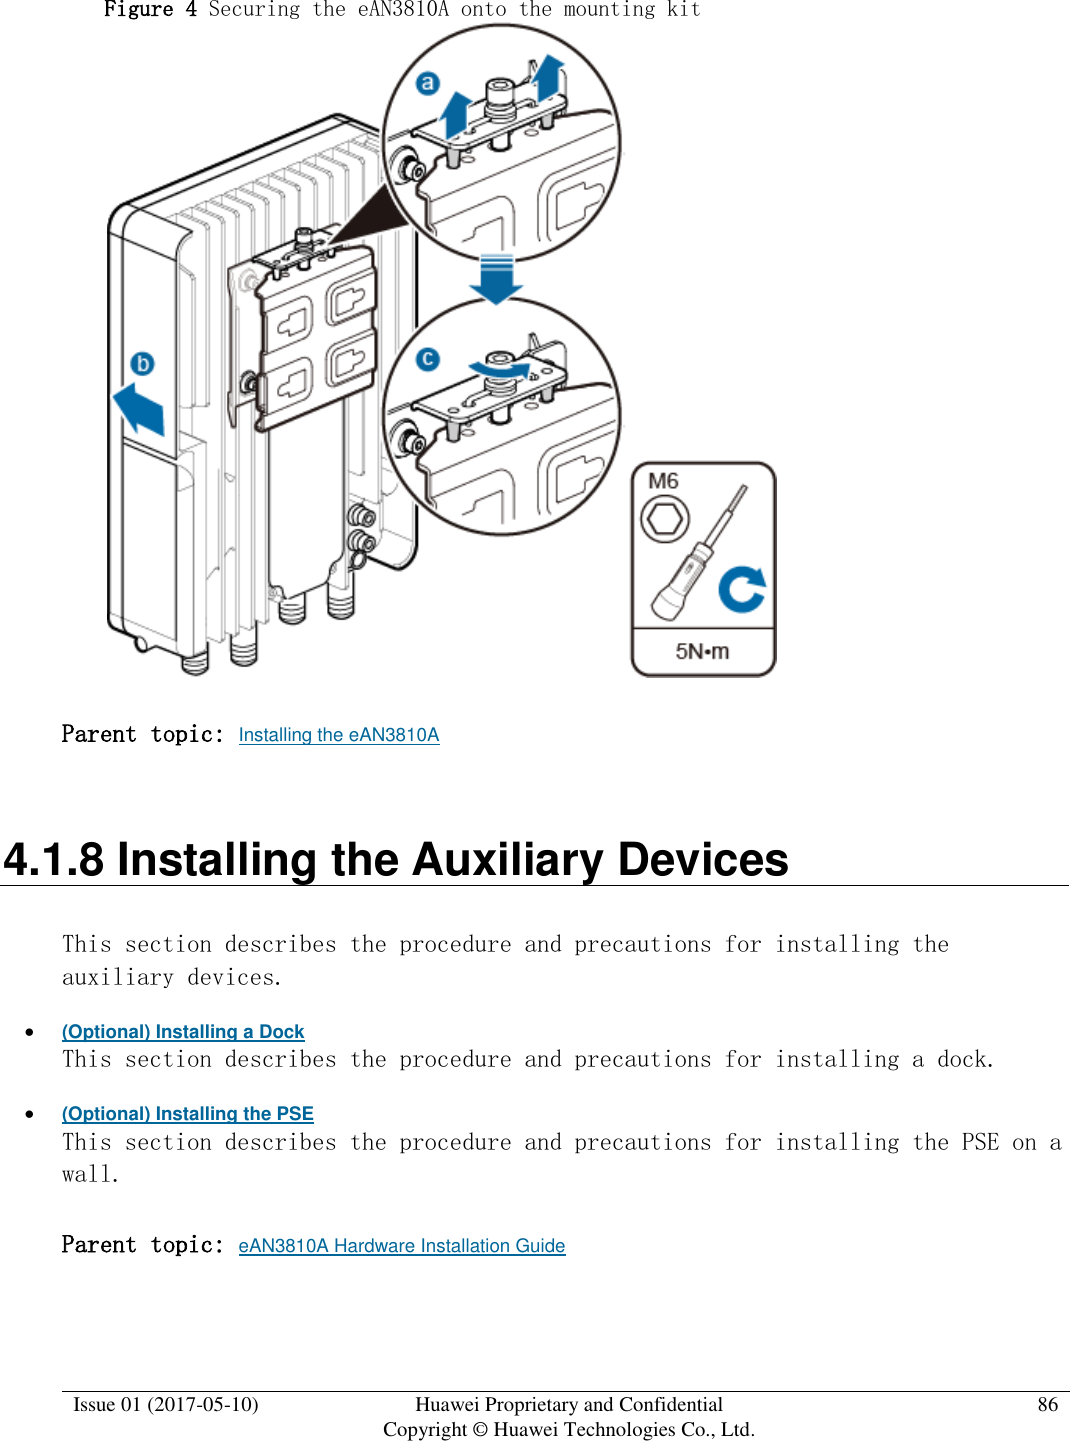  Issue 01 (2017-05-10) Huawei Proprietary and Confidential      Copyright © Huawei Technologies Co., Ltd. 86  Figure 4 Securing the eAN3810A onto the mounting kit   Parent topic: Installing the eAN3810A 4.1.8 Installing the Auxiliary Devices This section describes the procedure and precautions for installing the auxiliary devices.  (Optional) Installing a Dock This section describes the procedure and precautions for installing a dock.  (Optional) Installing the PSE This section describes the procedure and precautions for installing the PSE on a wall. Parent topic: eAN3810A Hardware Installation Guide 